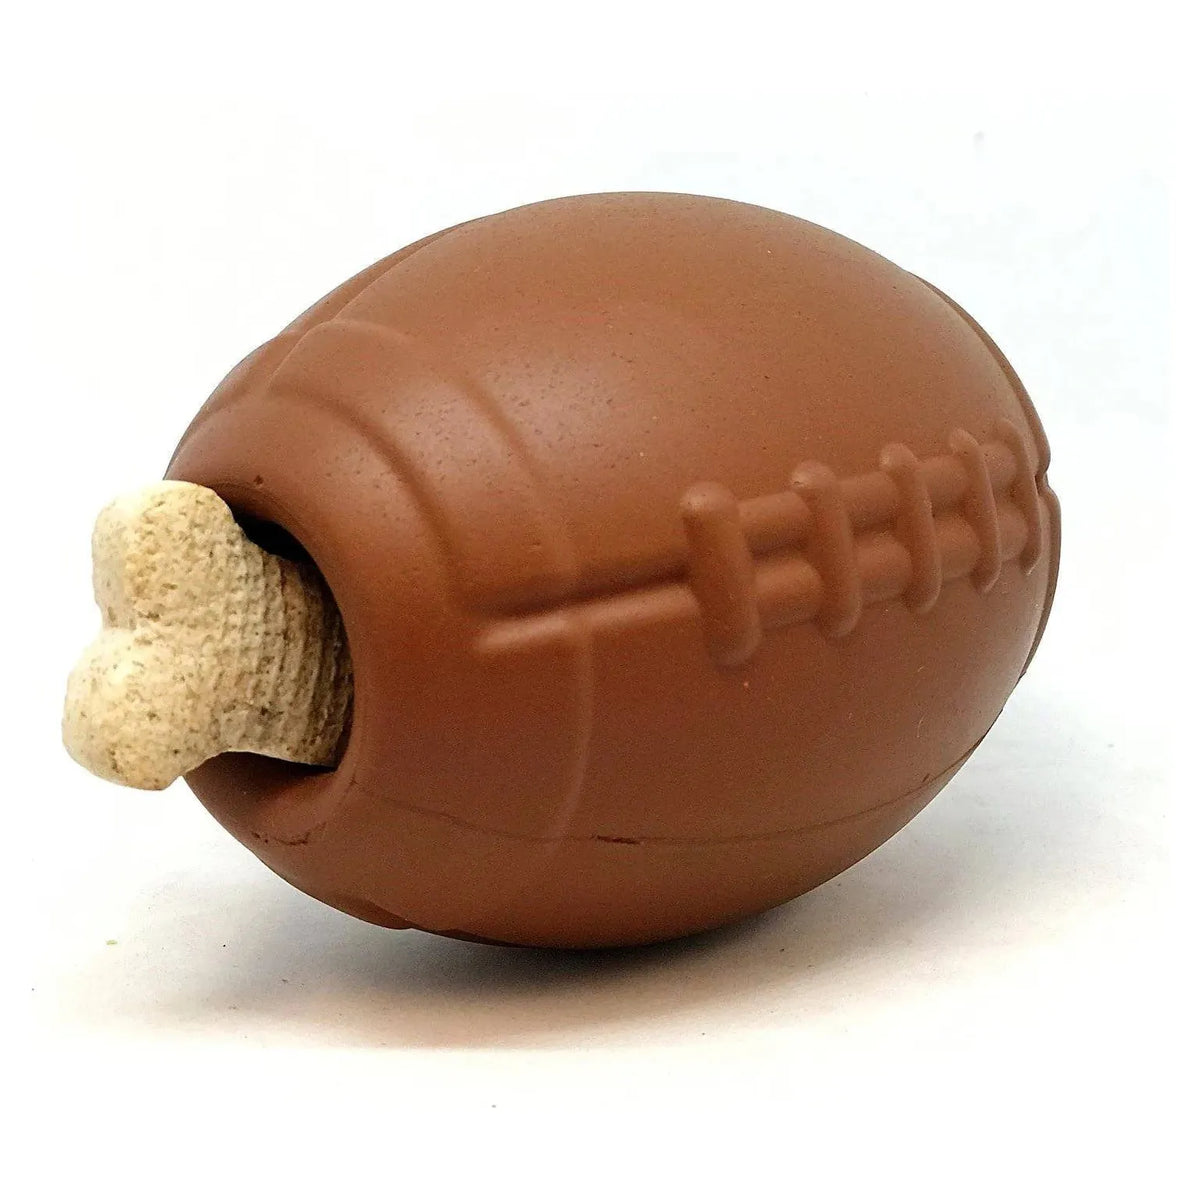 SodaPup/True Dogs, LLC Large Football Toy Football Durable Rubber Chew Toy and Treat Dispenser by SodaPup/True Dogs, LLC